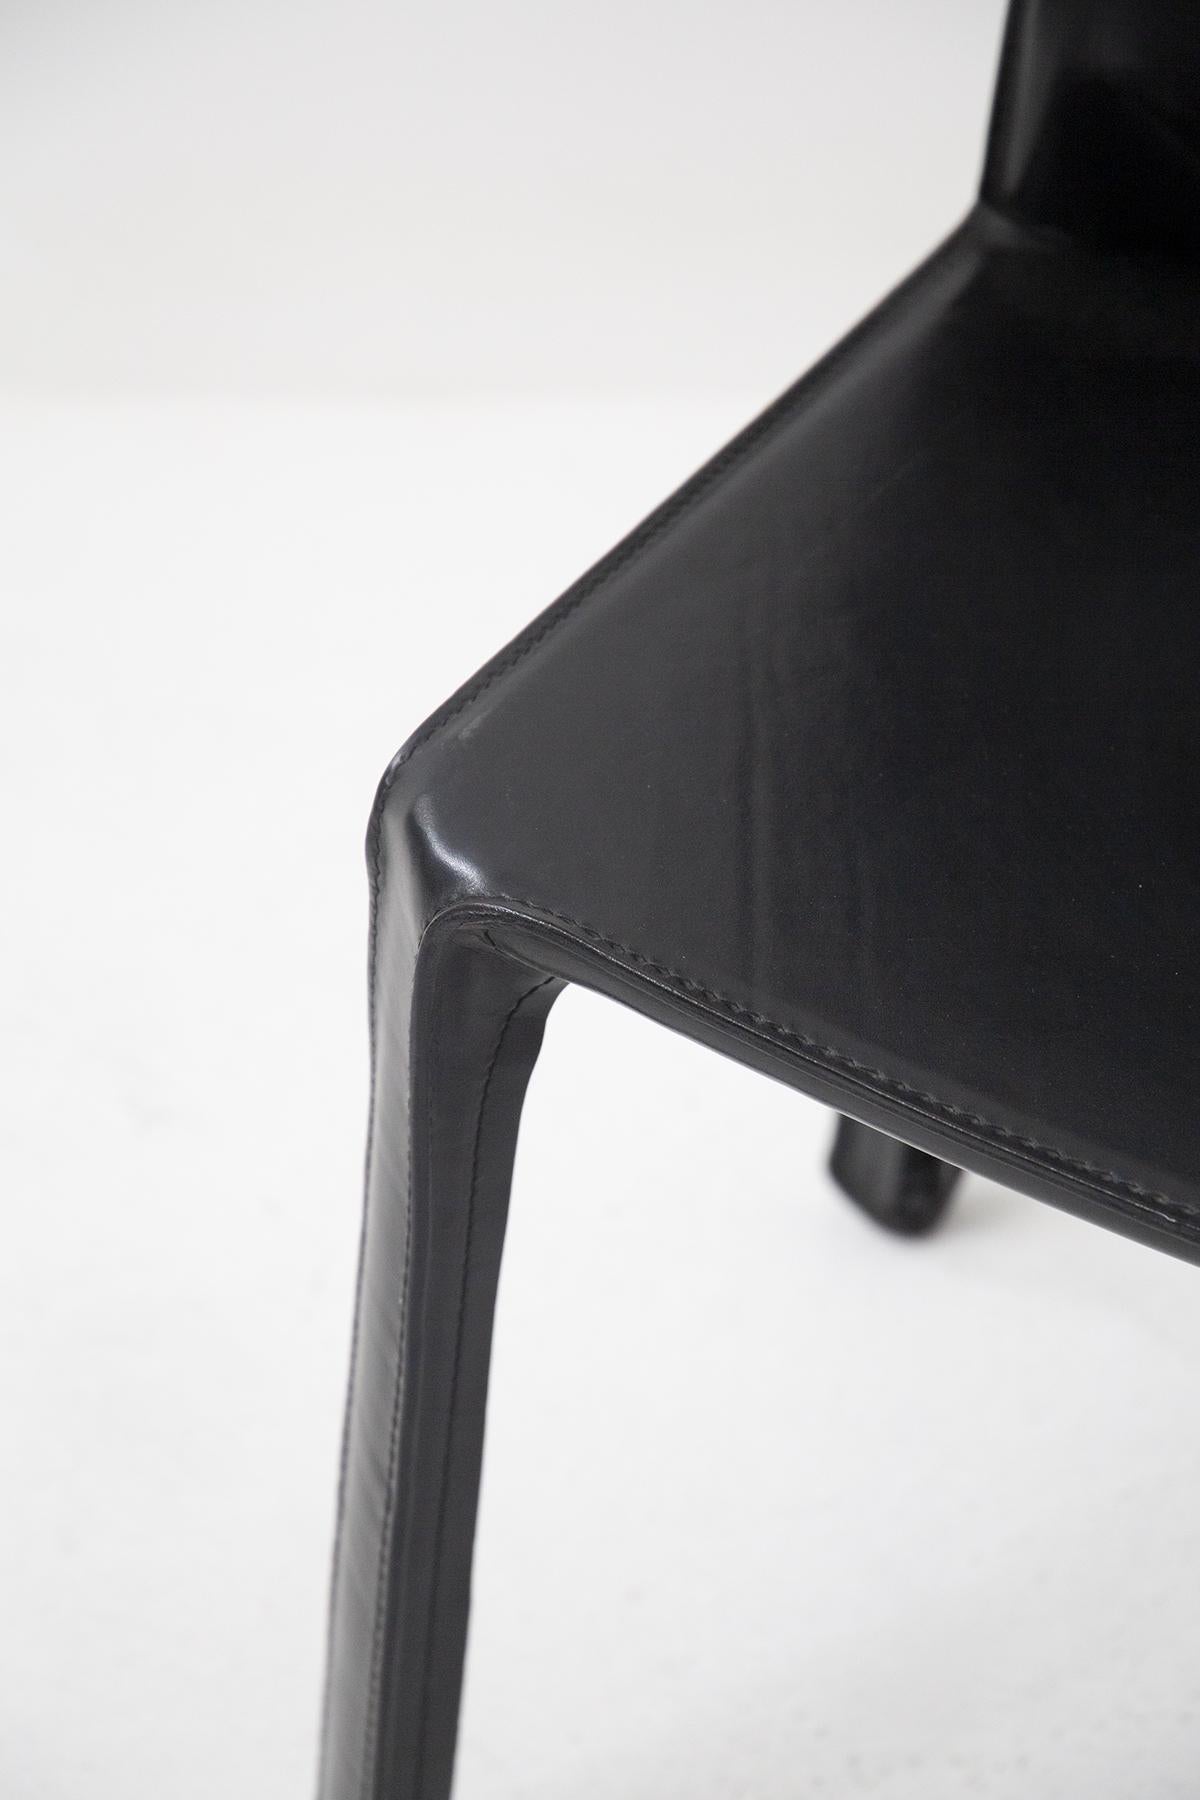 Mid-20th Century Black Leather Chairs by Mario Bellini for Cassina